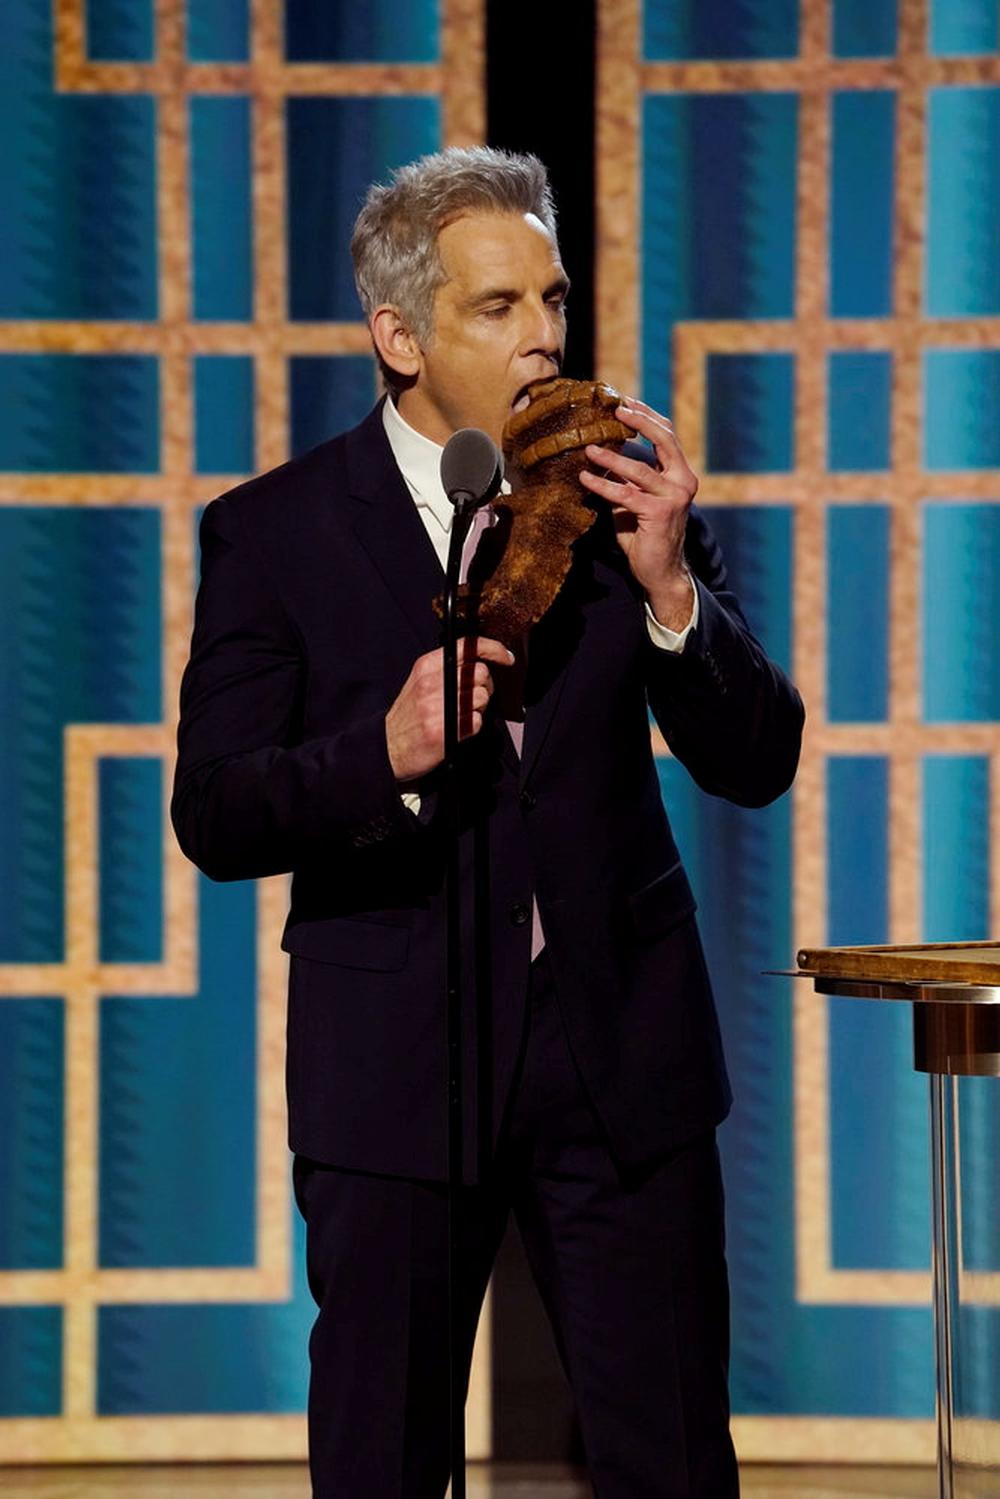 Ben Stiller is seen in this handout photo from the 78th Annual Golden Globe Awards in New York  / NBC HANDOUT